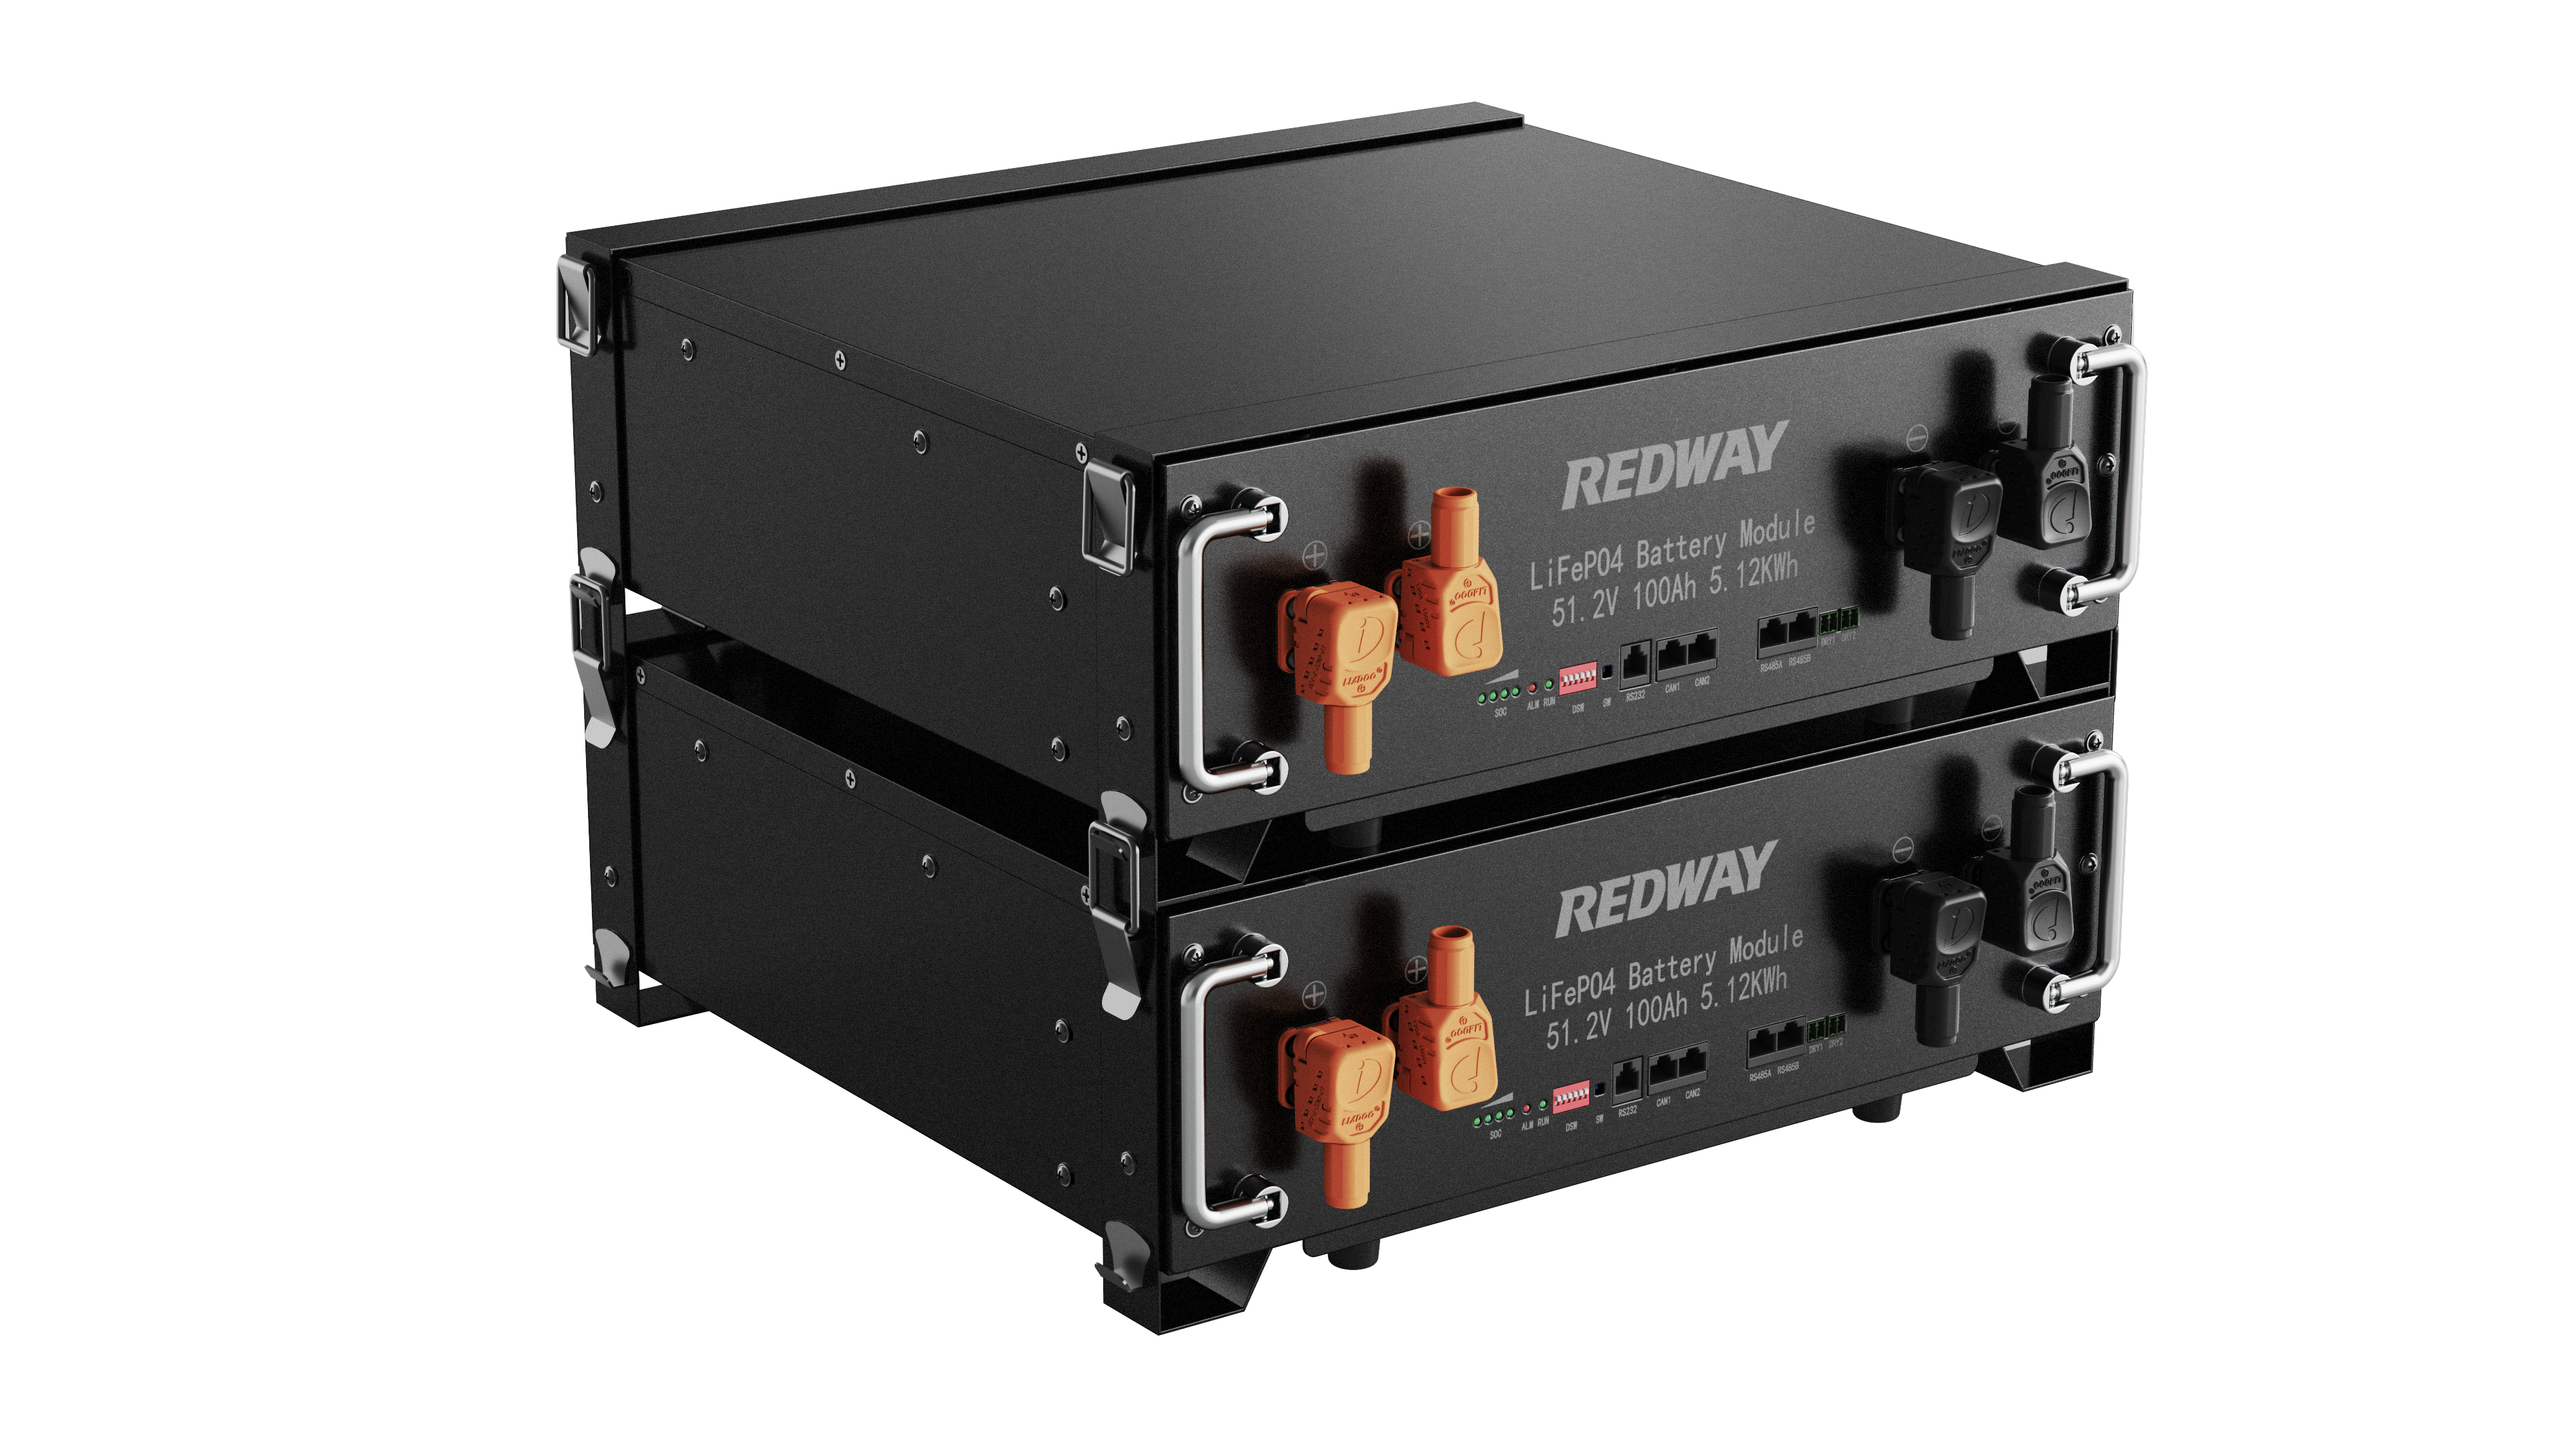 Redway PM-LV51100-3U Lithium Battery Module, a Top Seller in Jordan 2023 with OEM/ODM Options